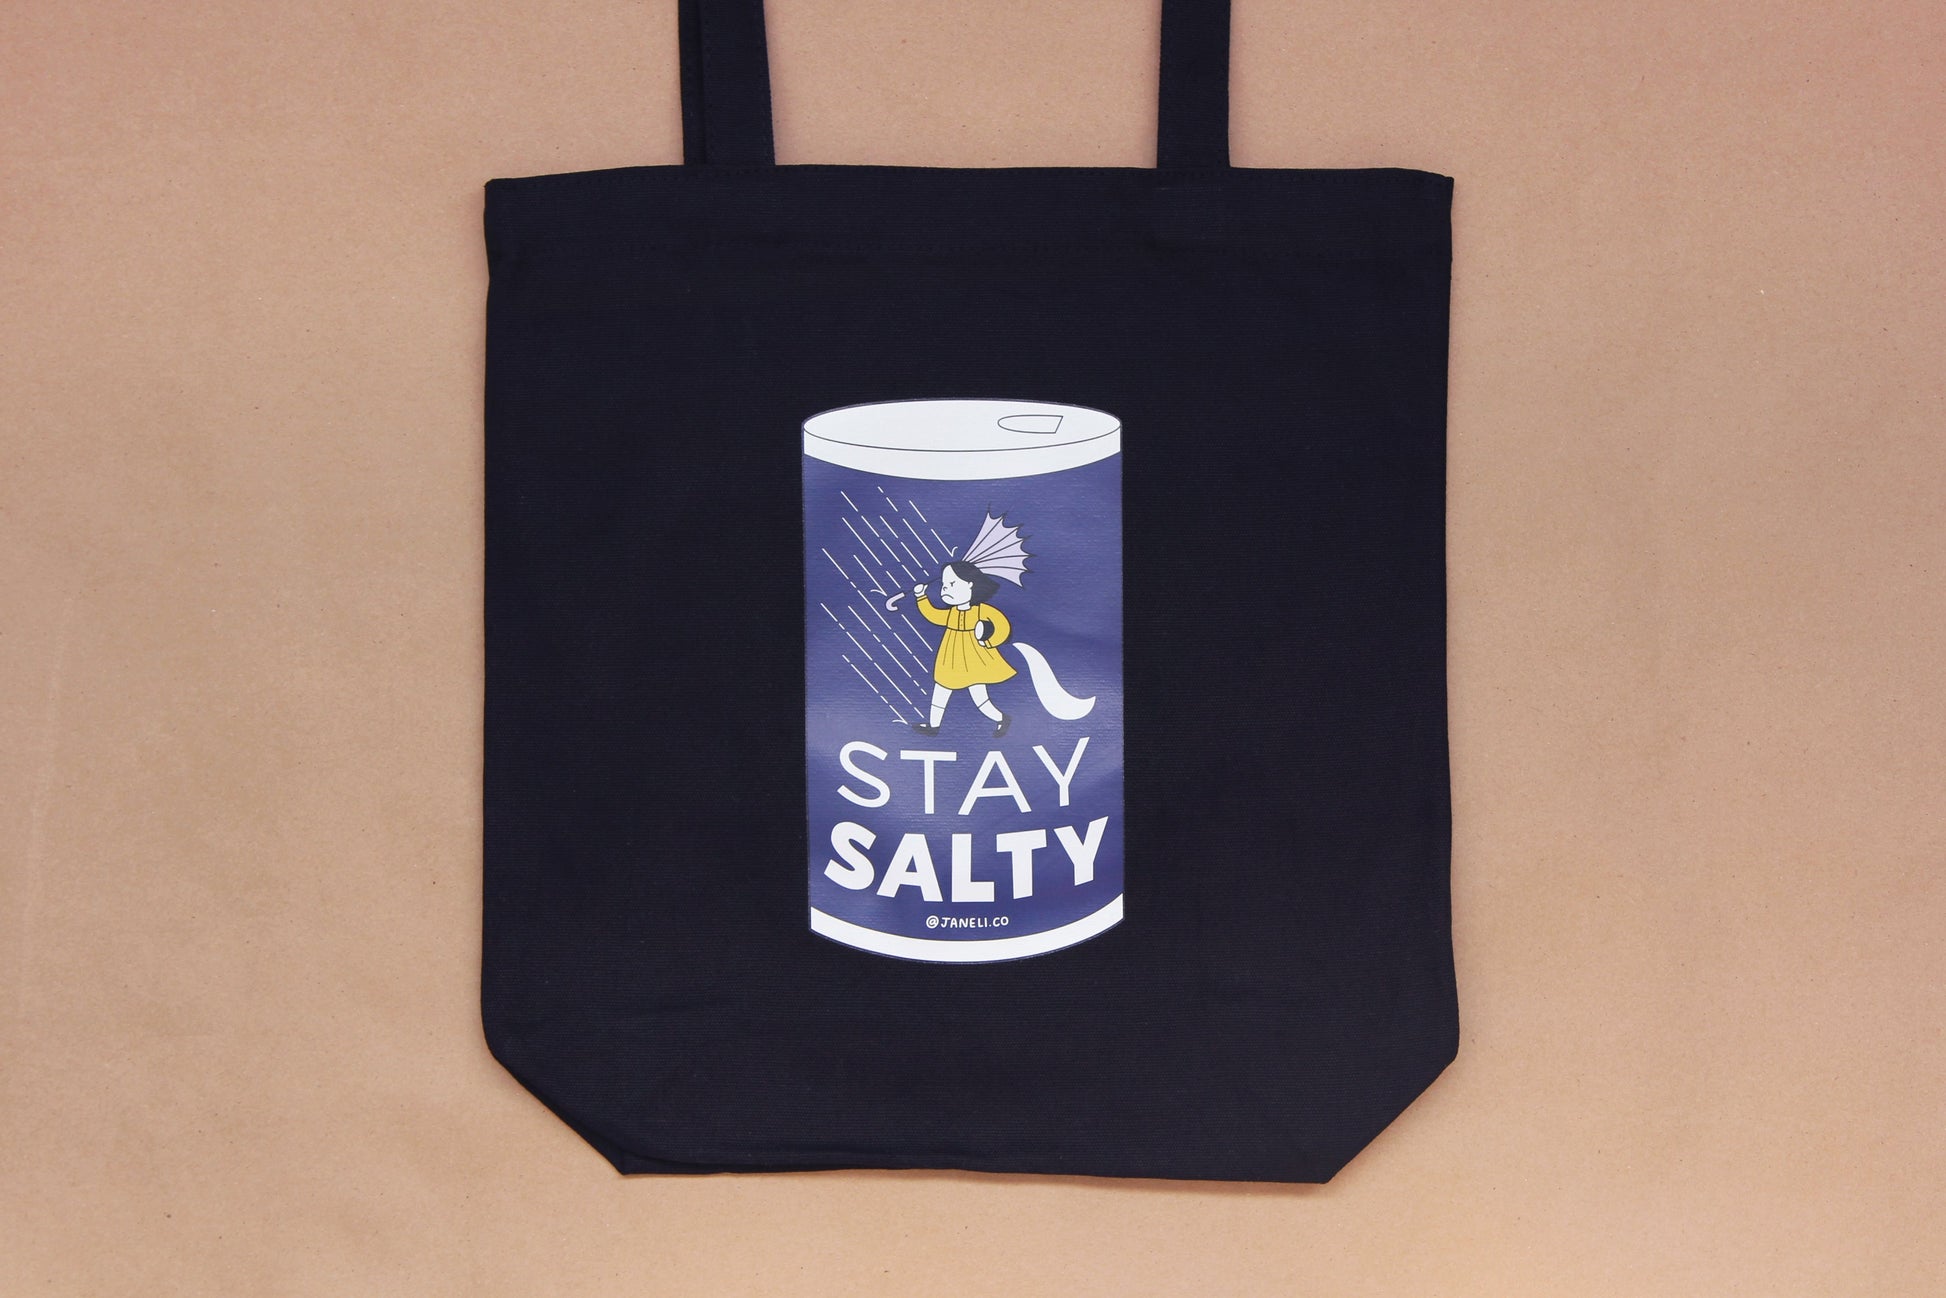 A photo of a black tote with a grumpy salt girl that says "Stay Salty" on it over a tan background.